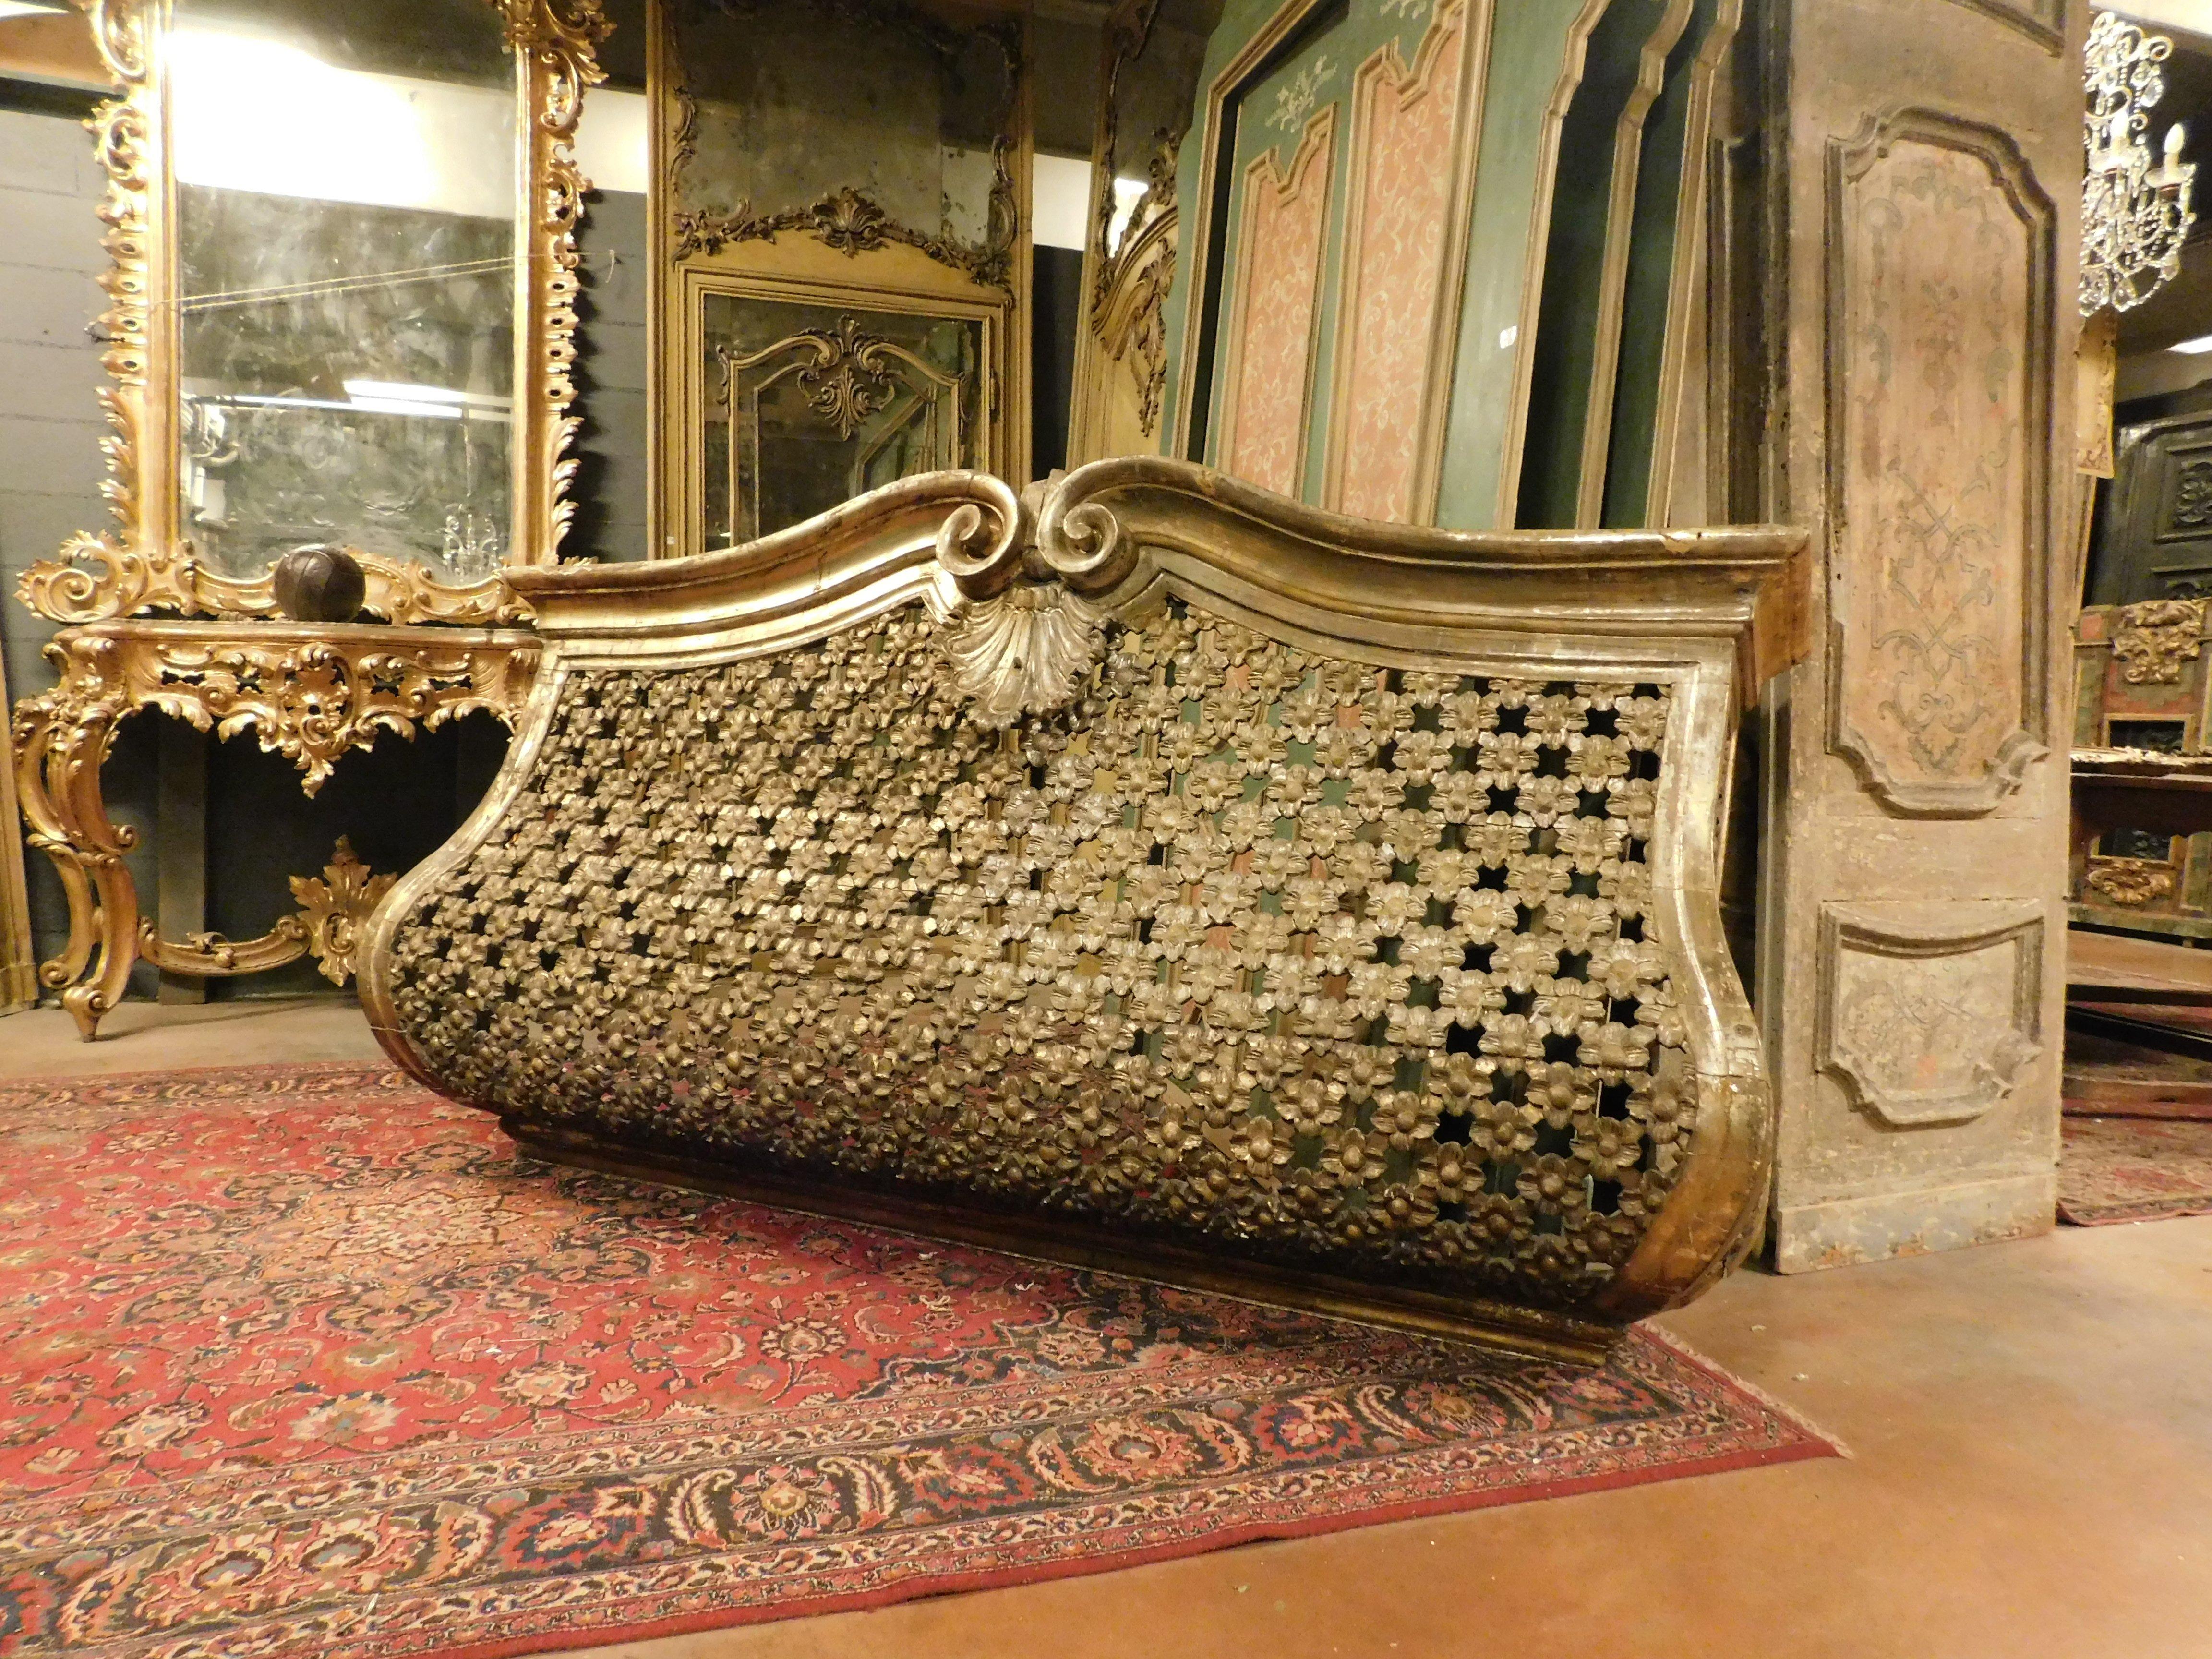 Ancient theater or church balcony, in perforated and gilded wood, from the 18th century, from Venice, of great artistic value, it was used for the privacy of nobles at mass or at the theatre, richly carved and gilded by hand, usable now as a